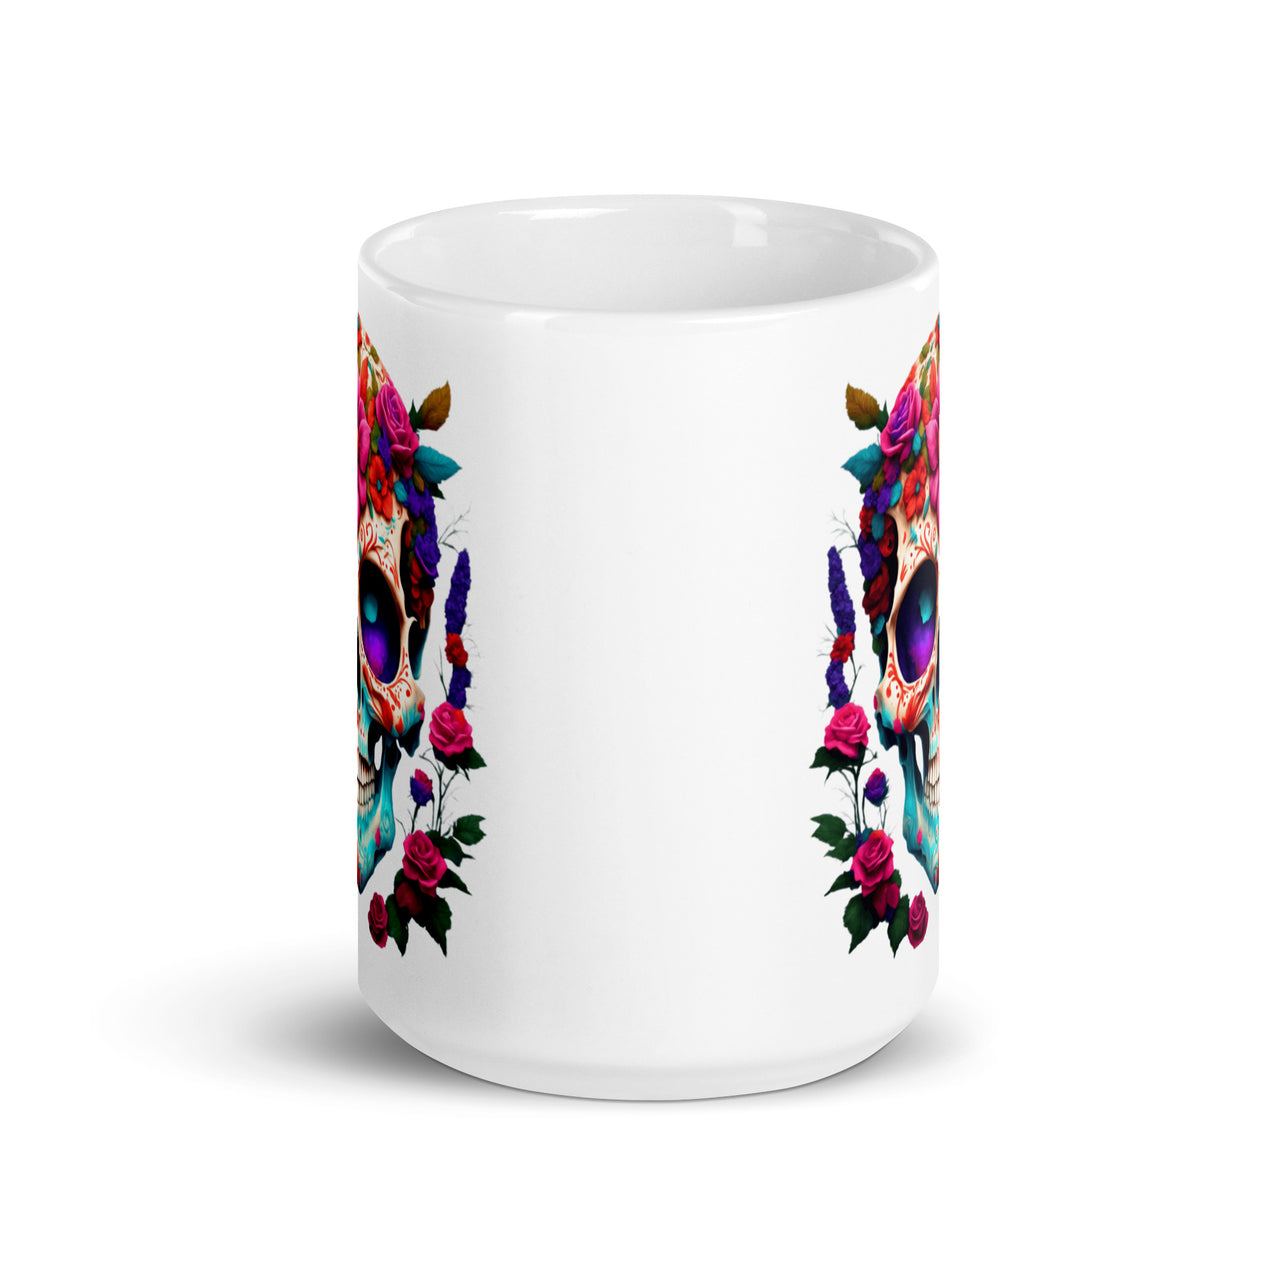 Day Of The Dead Sugar Skull Gothic Novelty Gift Mug Coffee Cup-White